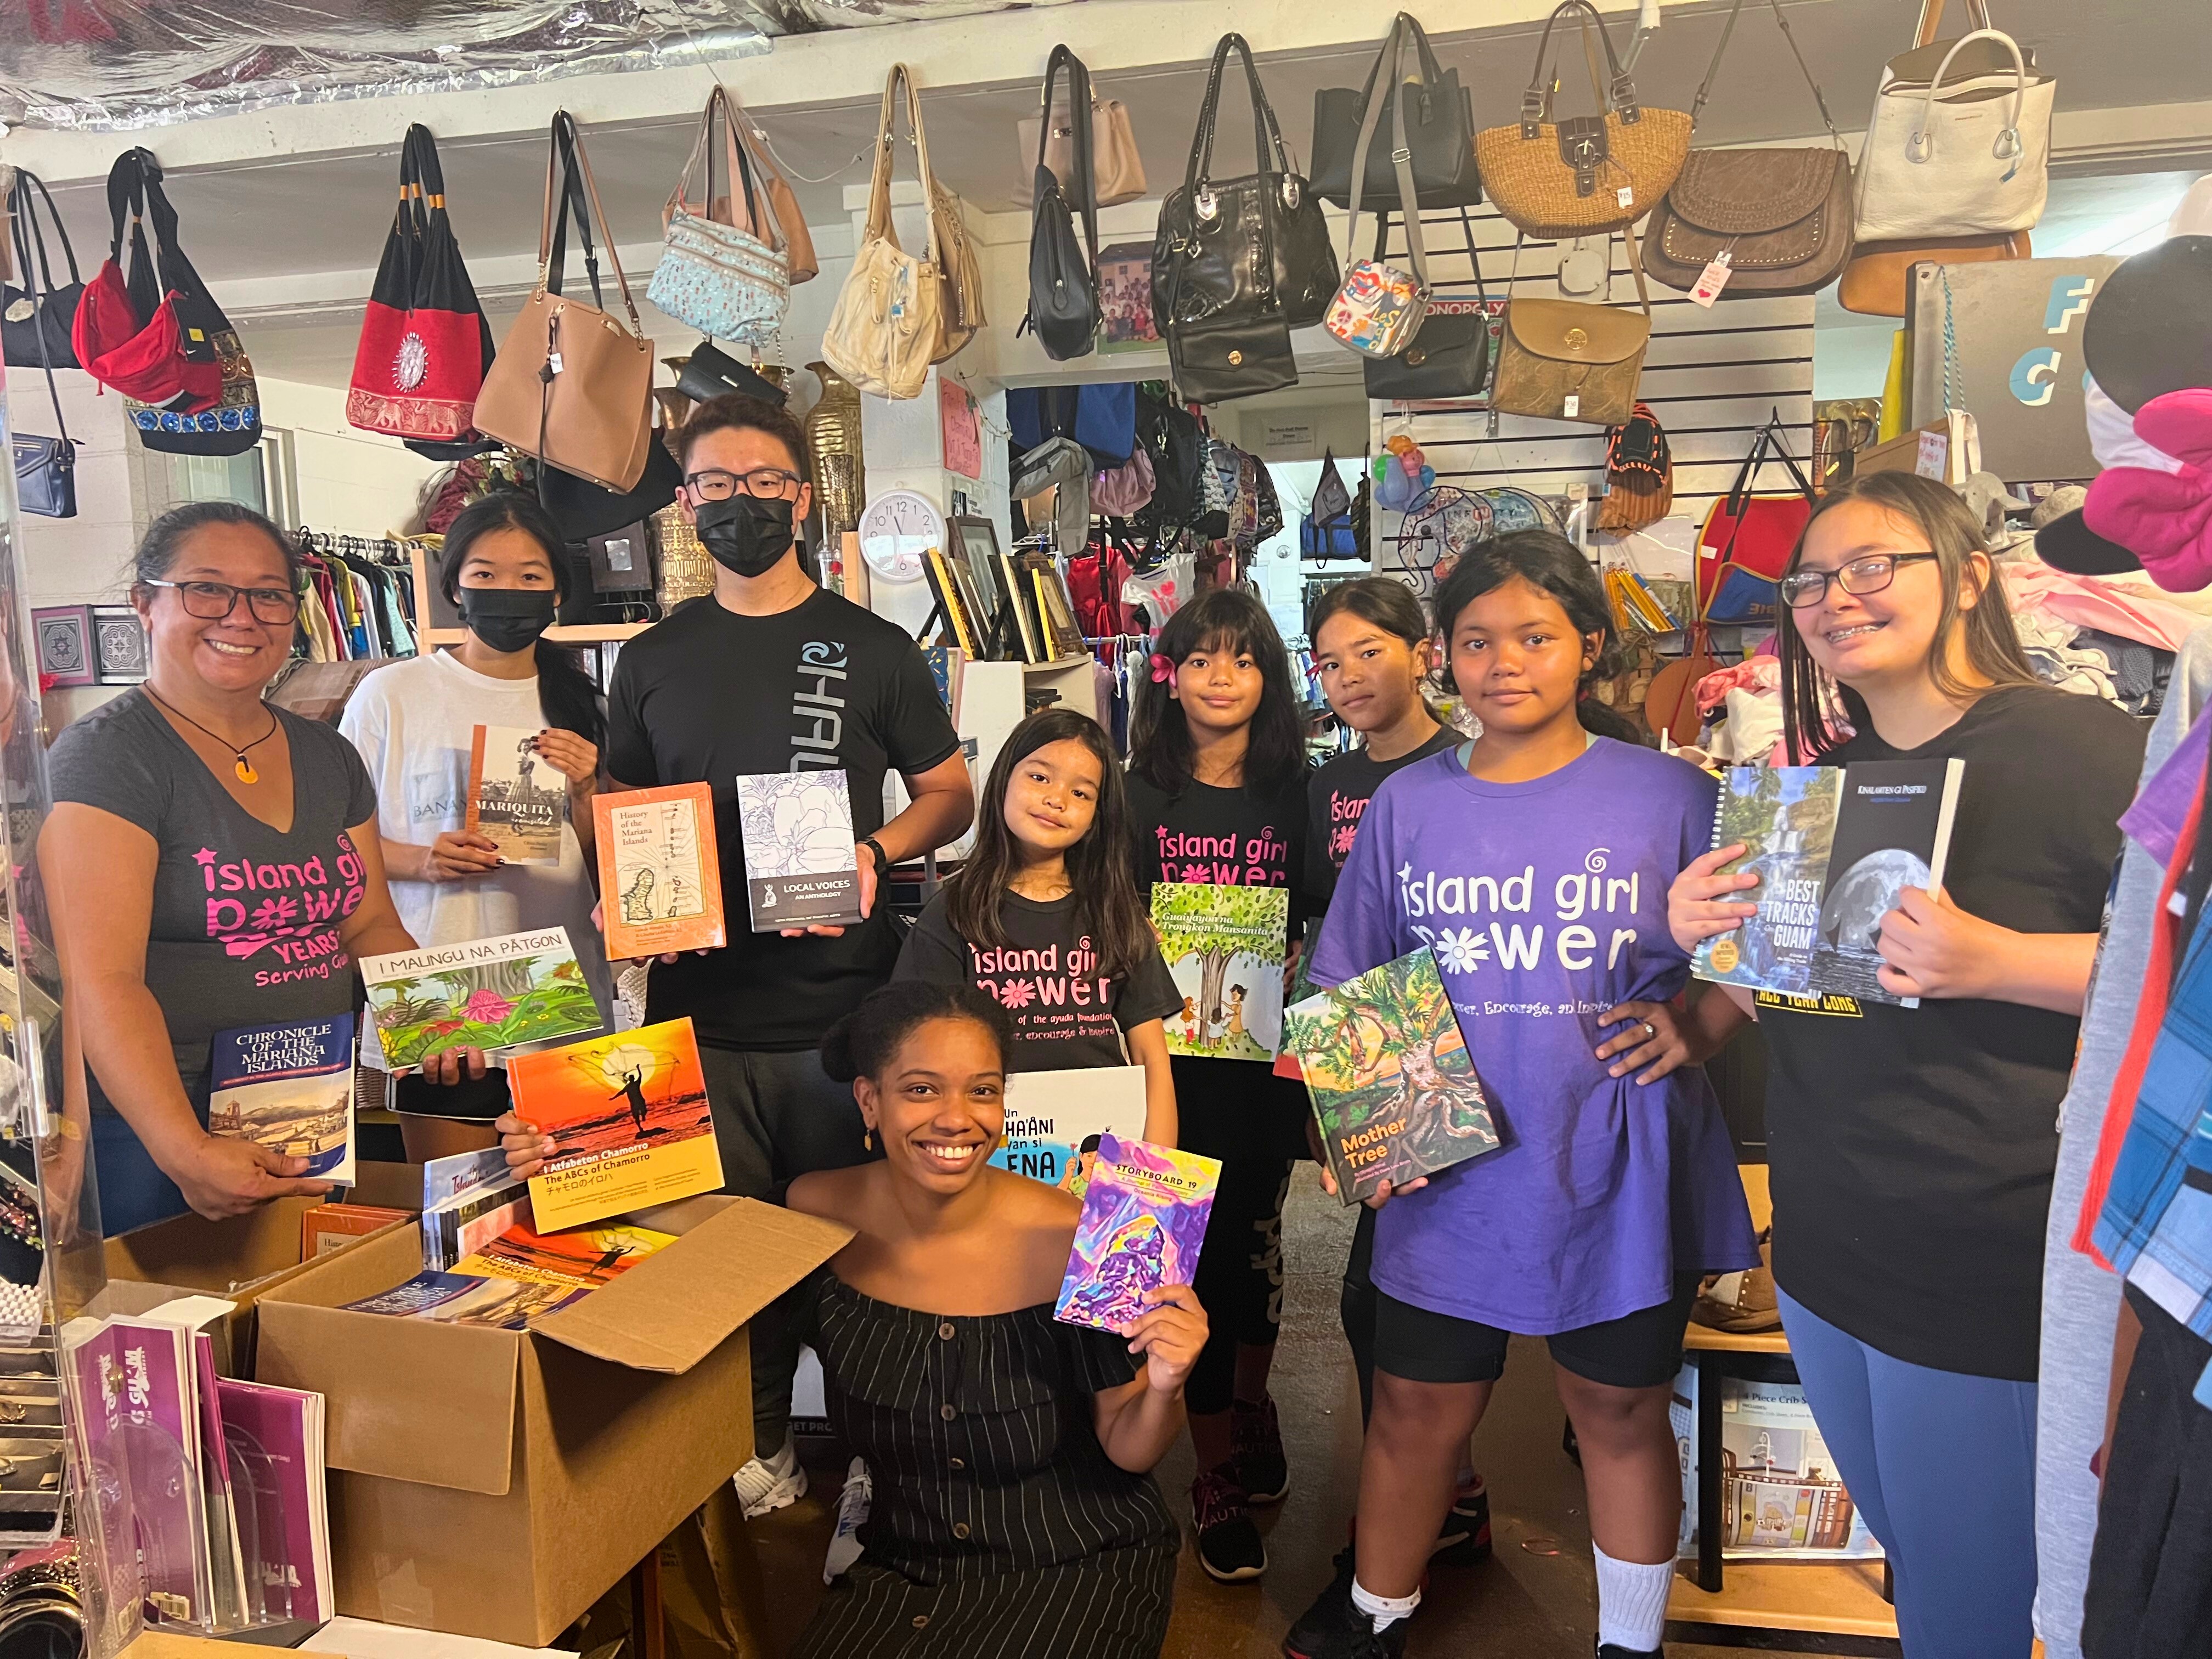 Group of young adults and kids holding up books inside a store with handbags hanging from the ceiling.